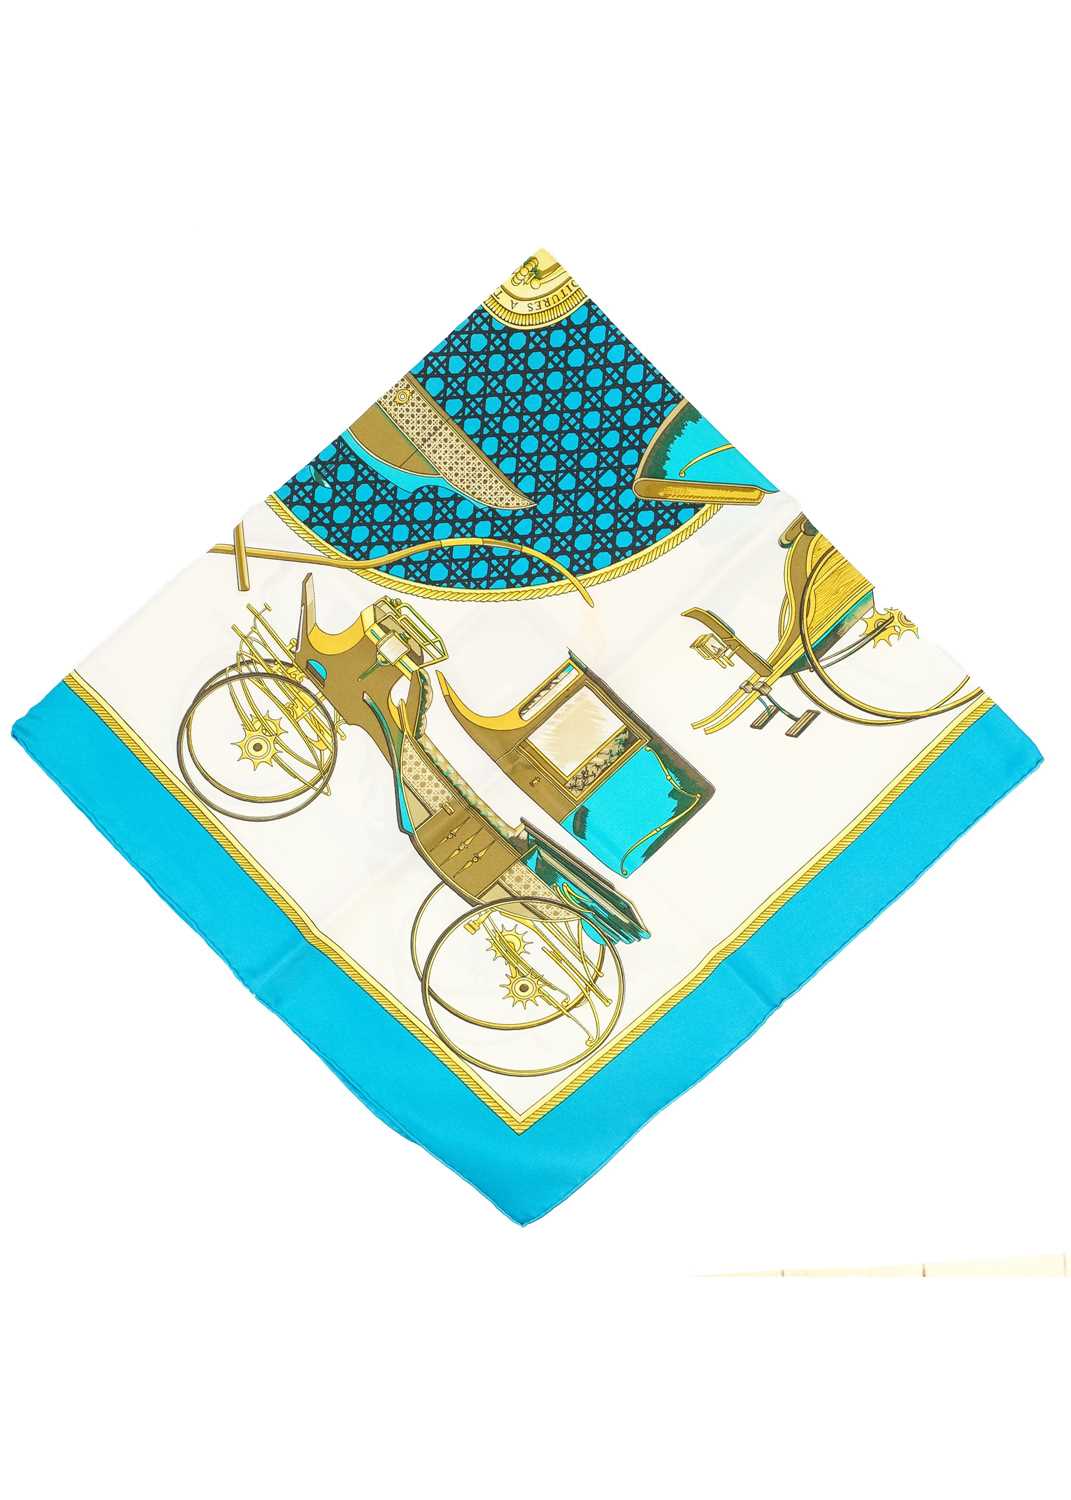 HERMES - A silk scarf in 'Les voitures a transformation' pattern designed by La Perriere. - Image 2 of 6